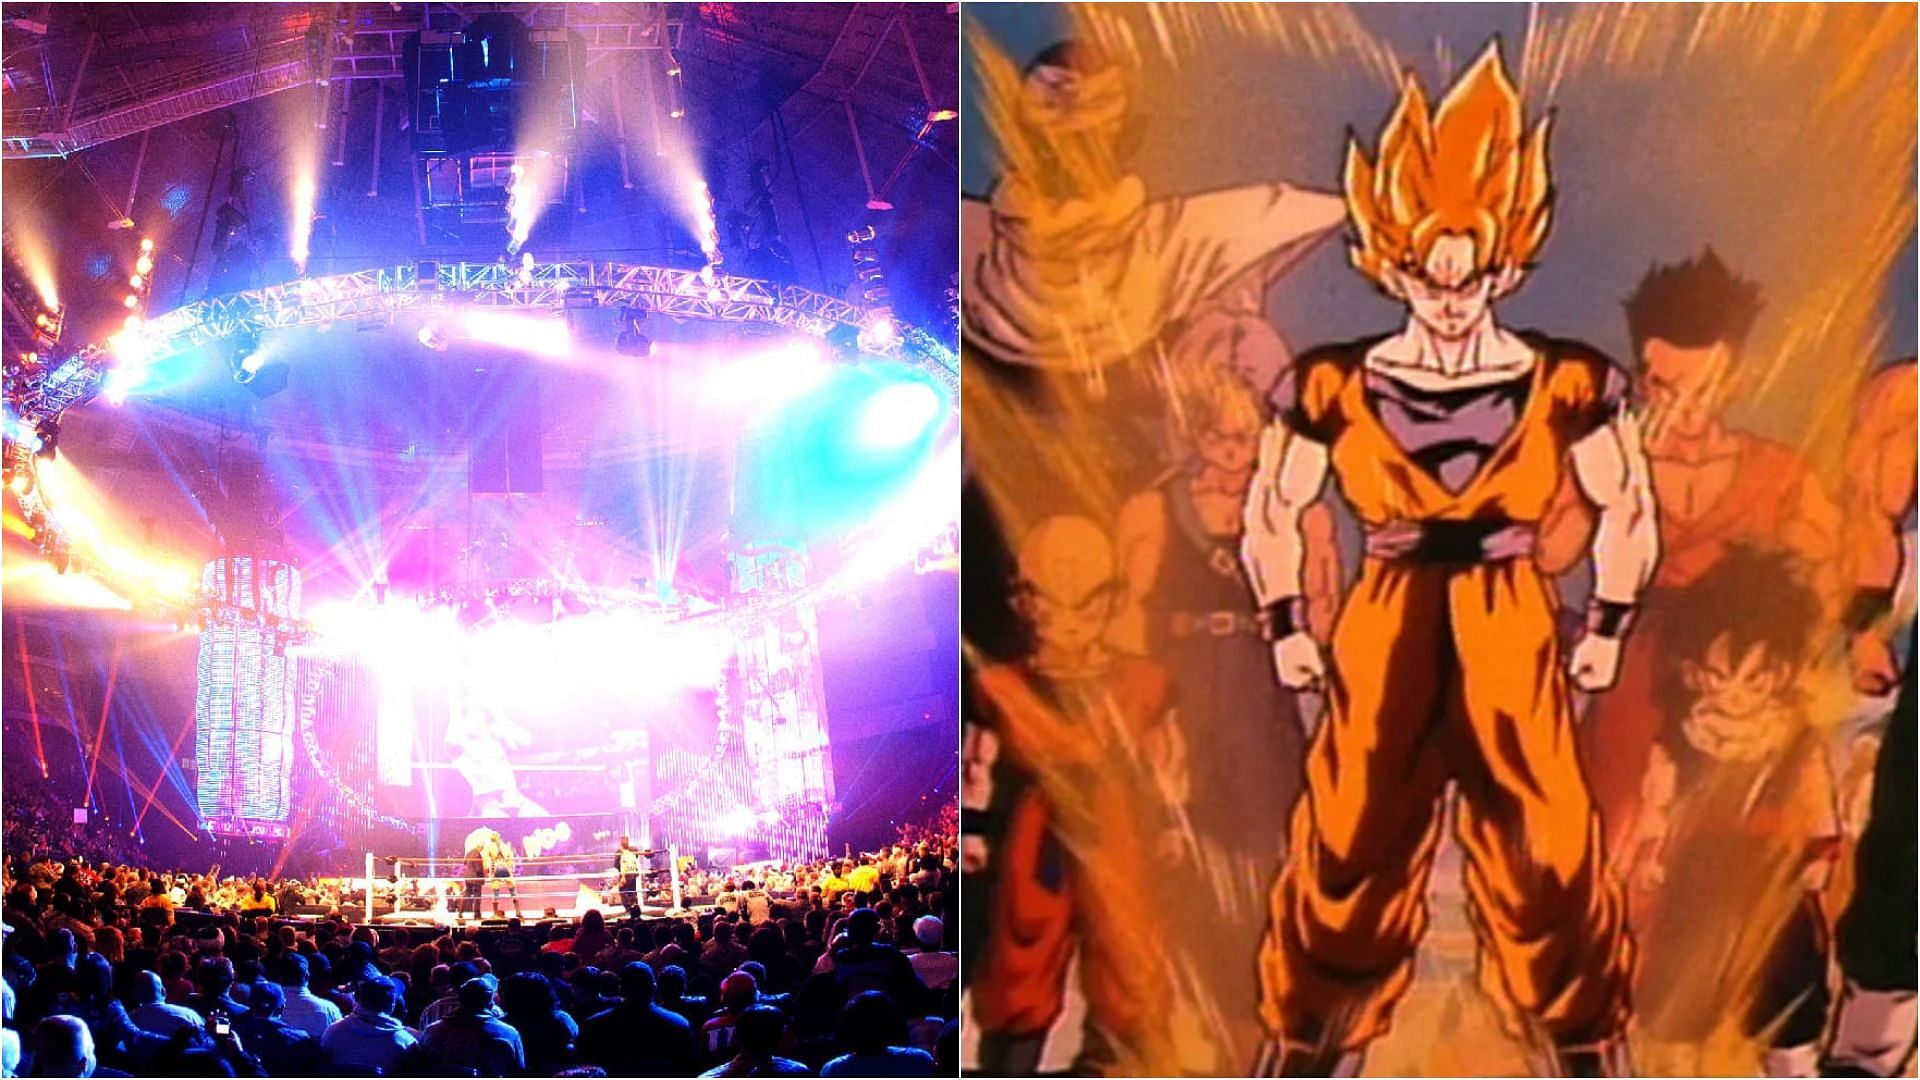 Some WWE Superstars are fans of Dragon Ball (Images via WWE.com and Toei Animation)